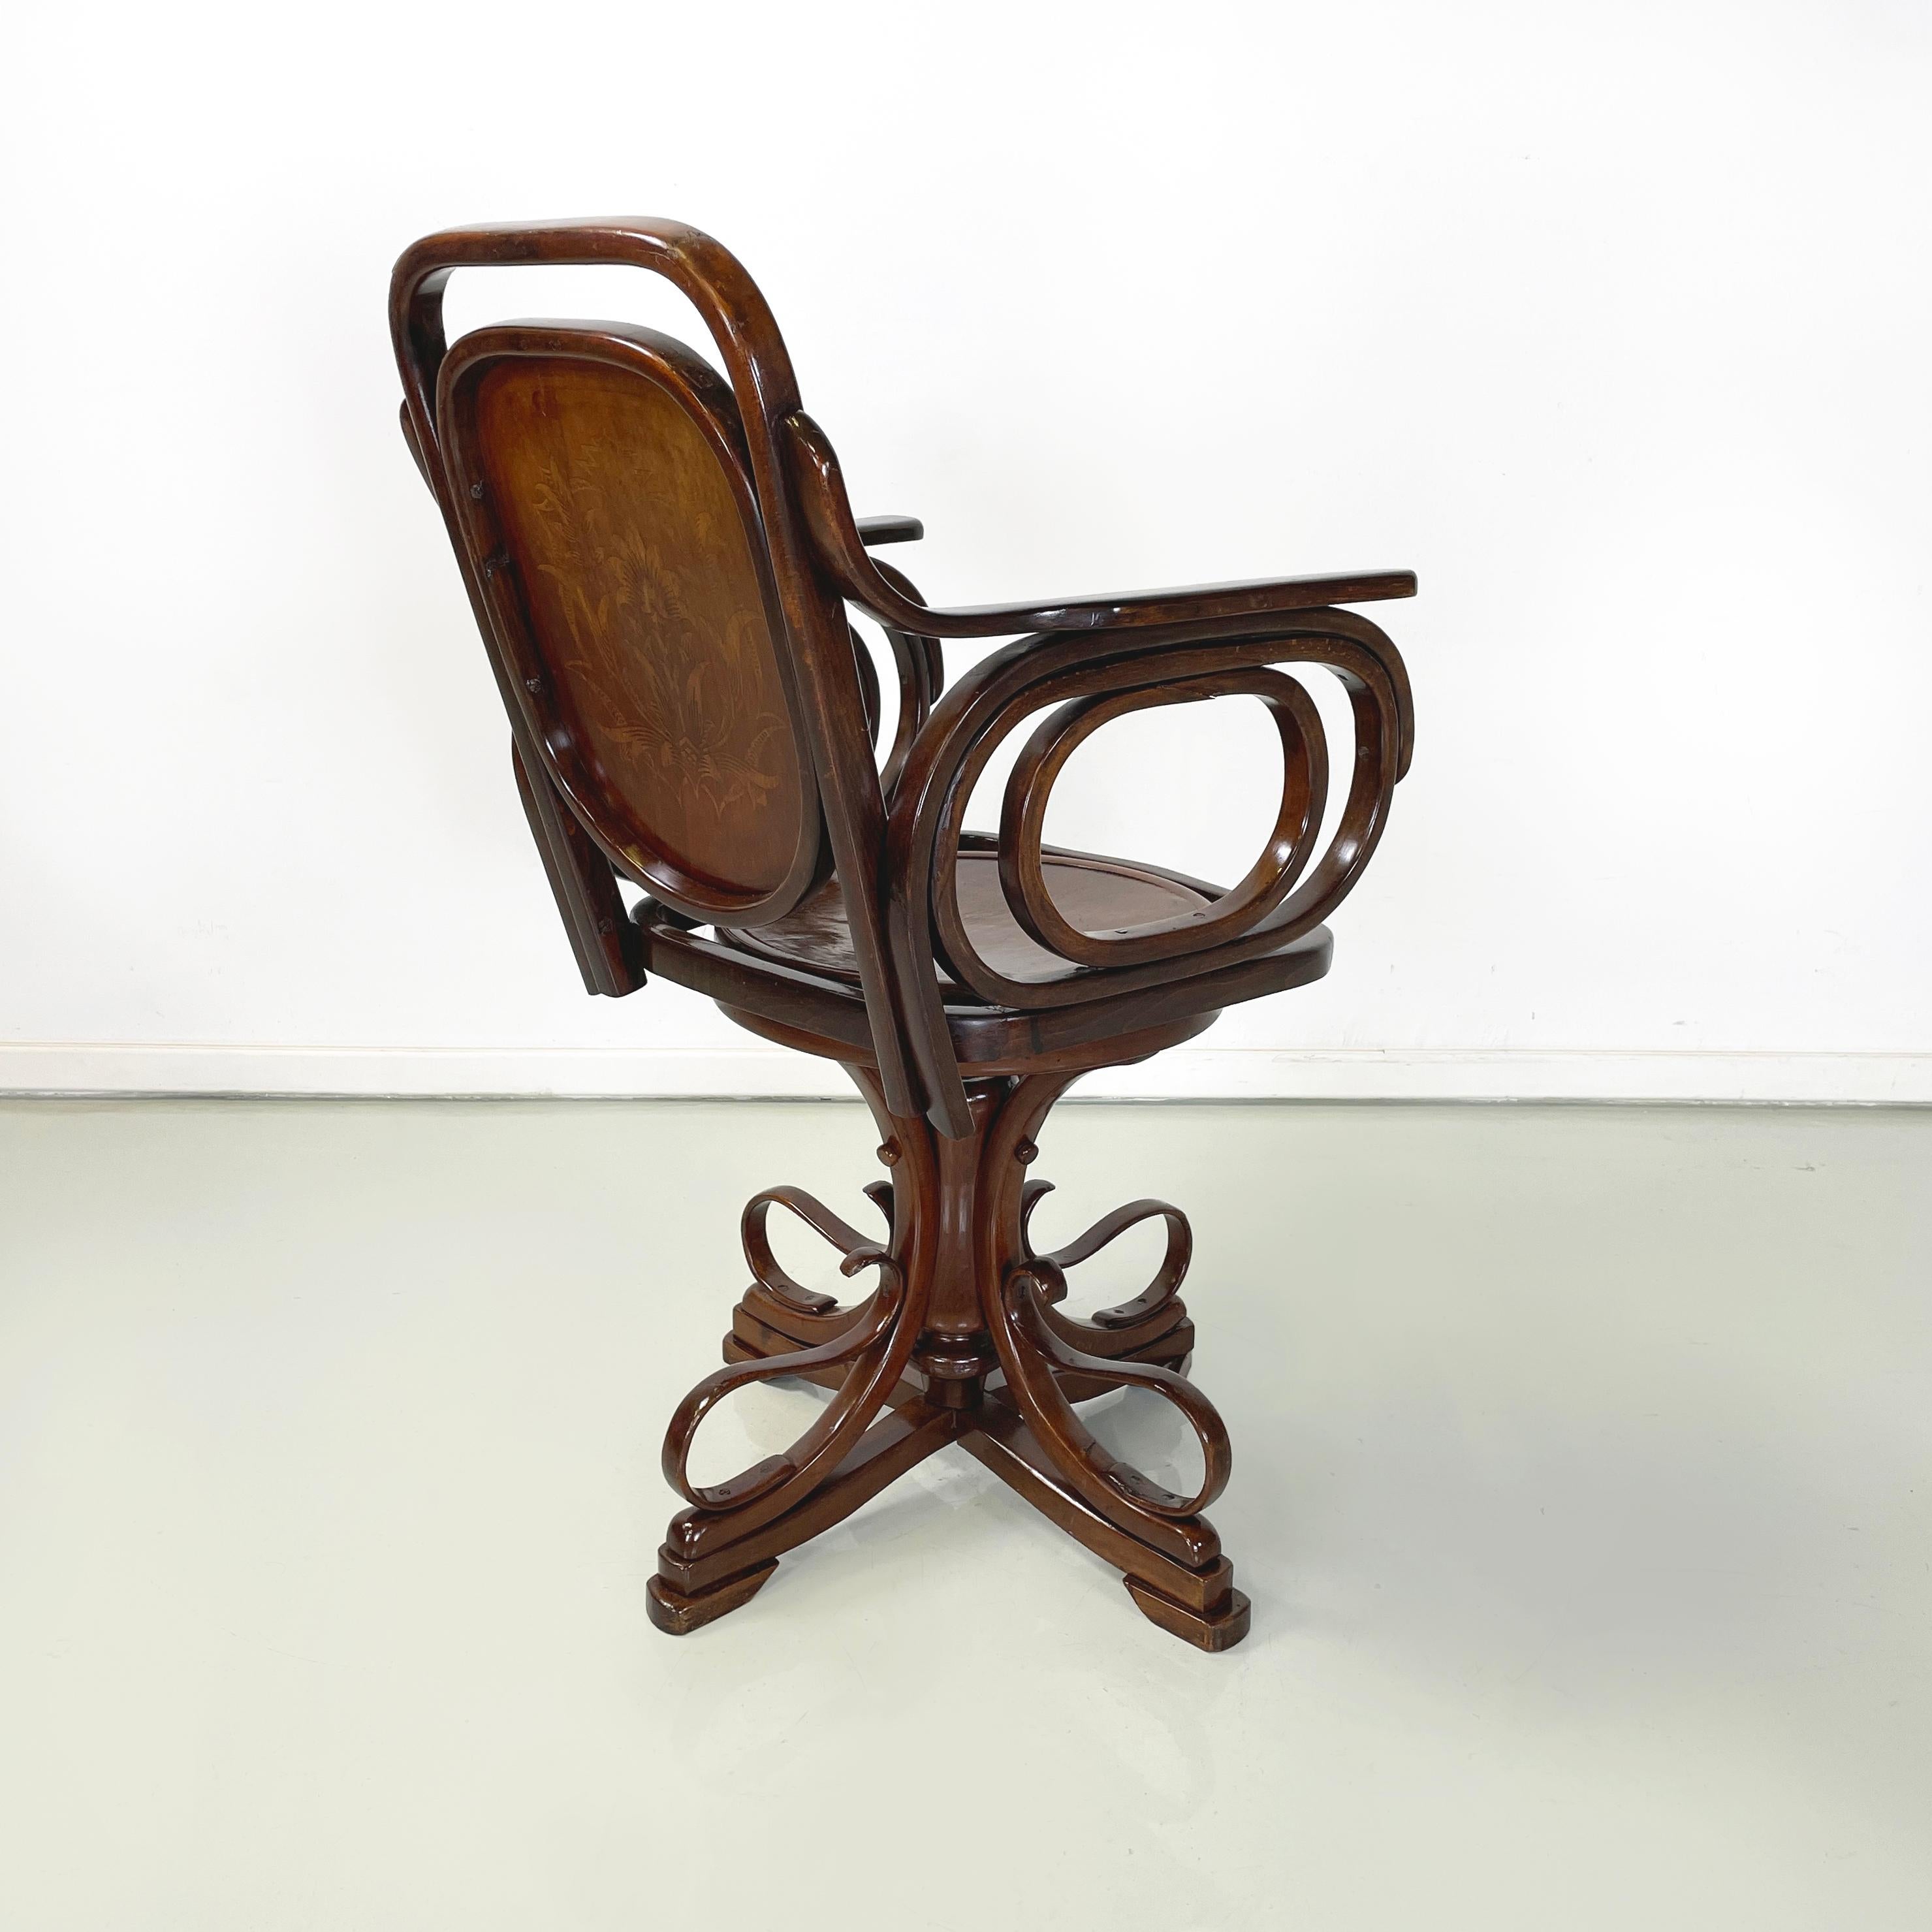 20th Century Austrian Art Nouveaux Swivel chair with armrests in wood by Thonet, early 1900s For Sale